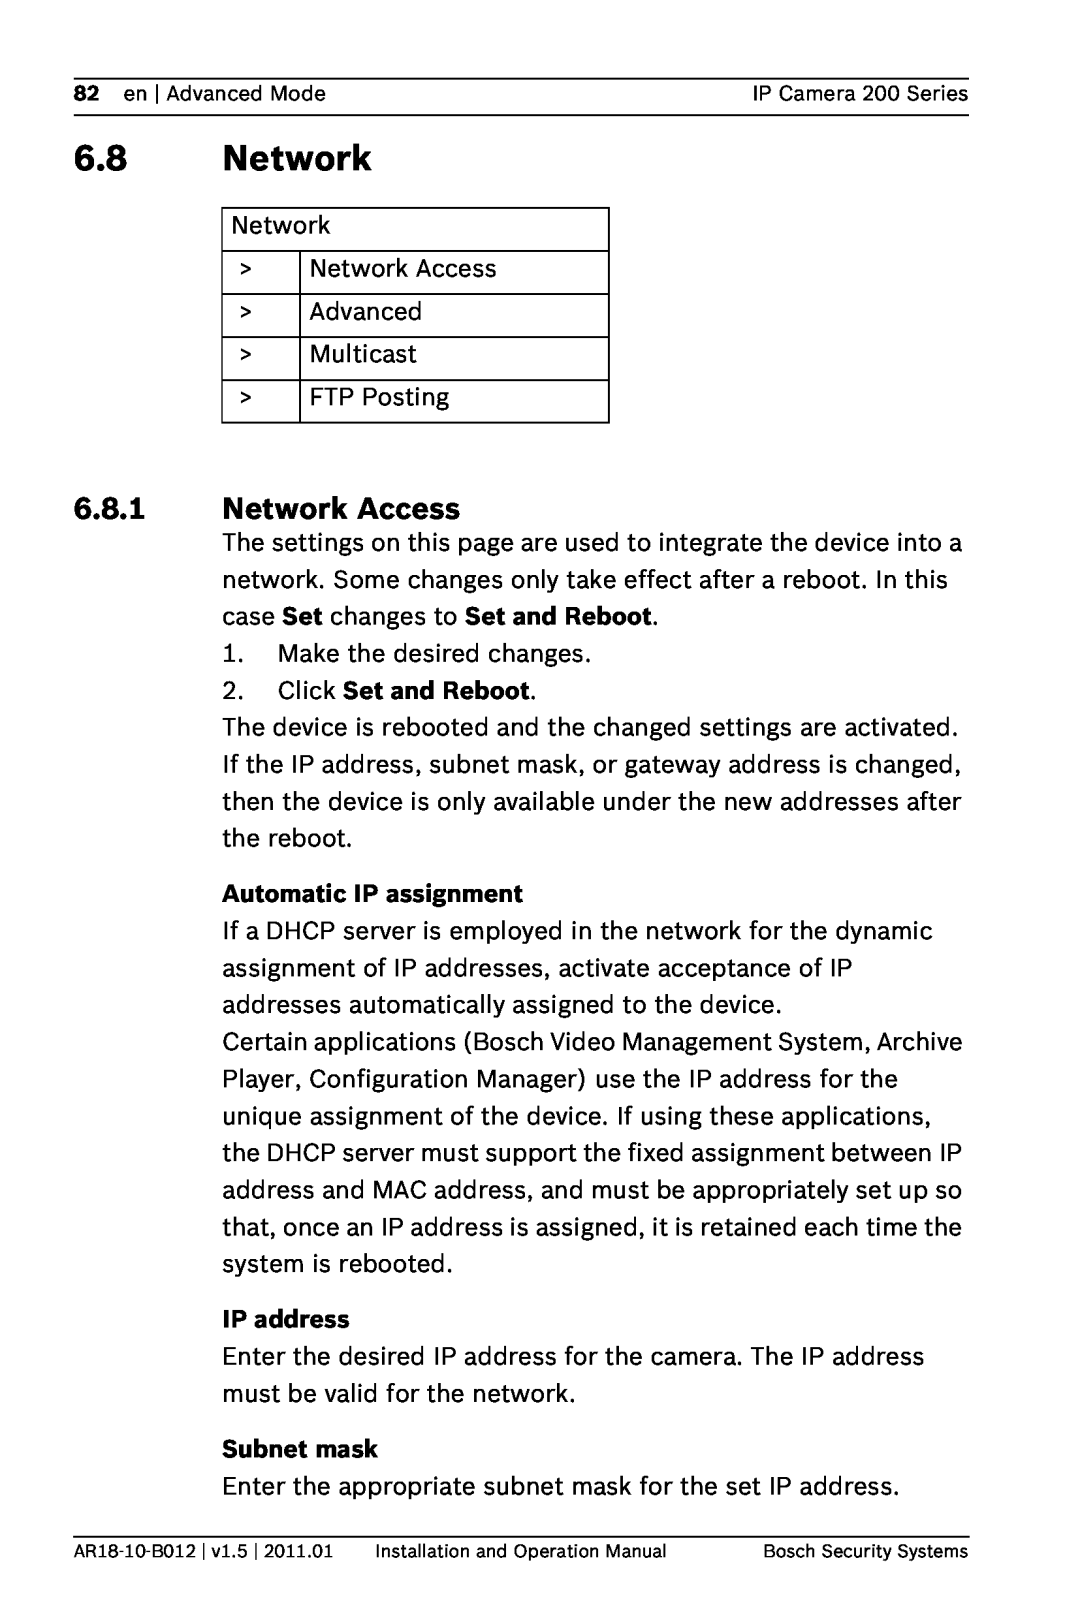 Bosch Appliances NDC-265-P Network Access, Automatic IP assignment, Click Set and Reboot, IP address, Subnet mask 